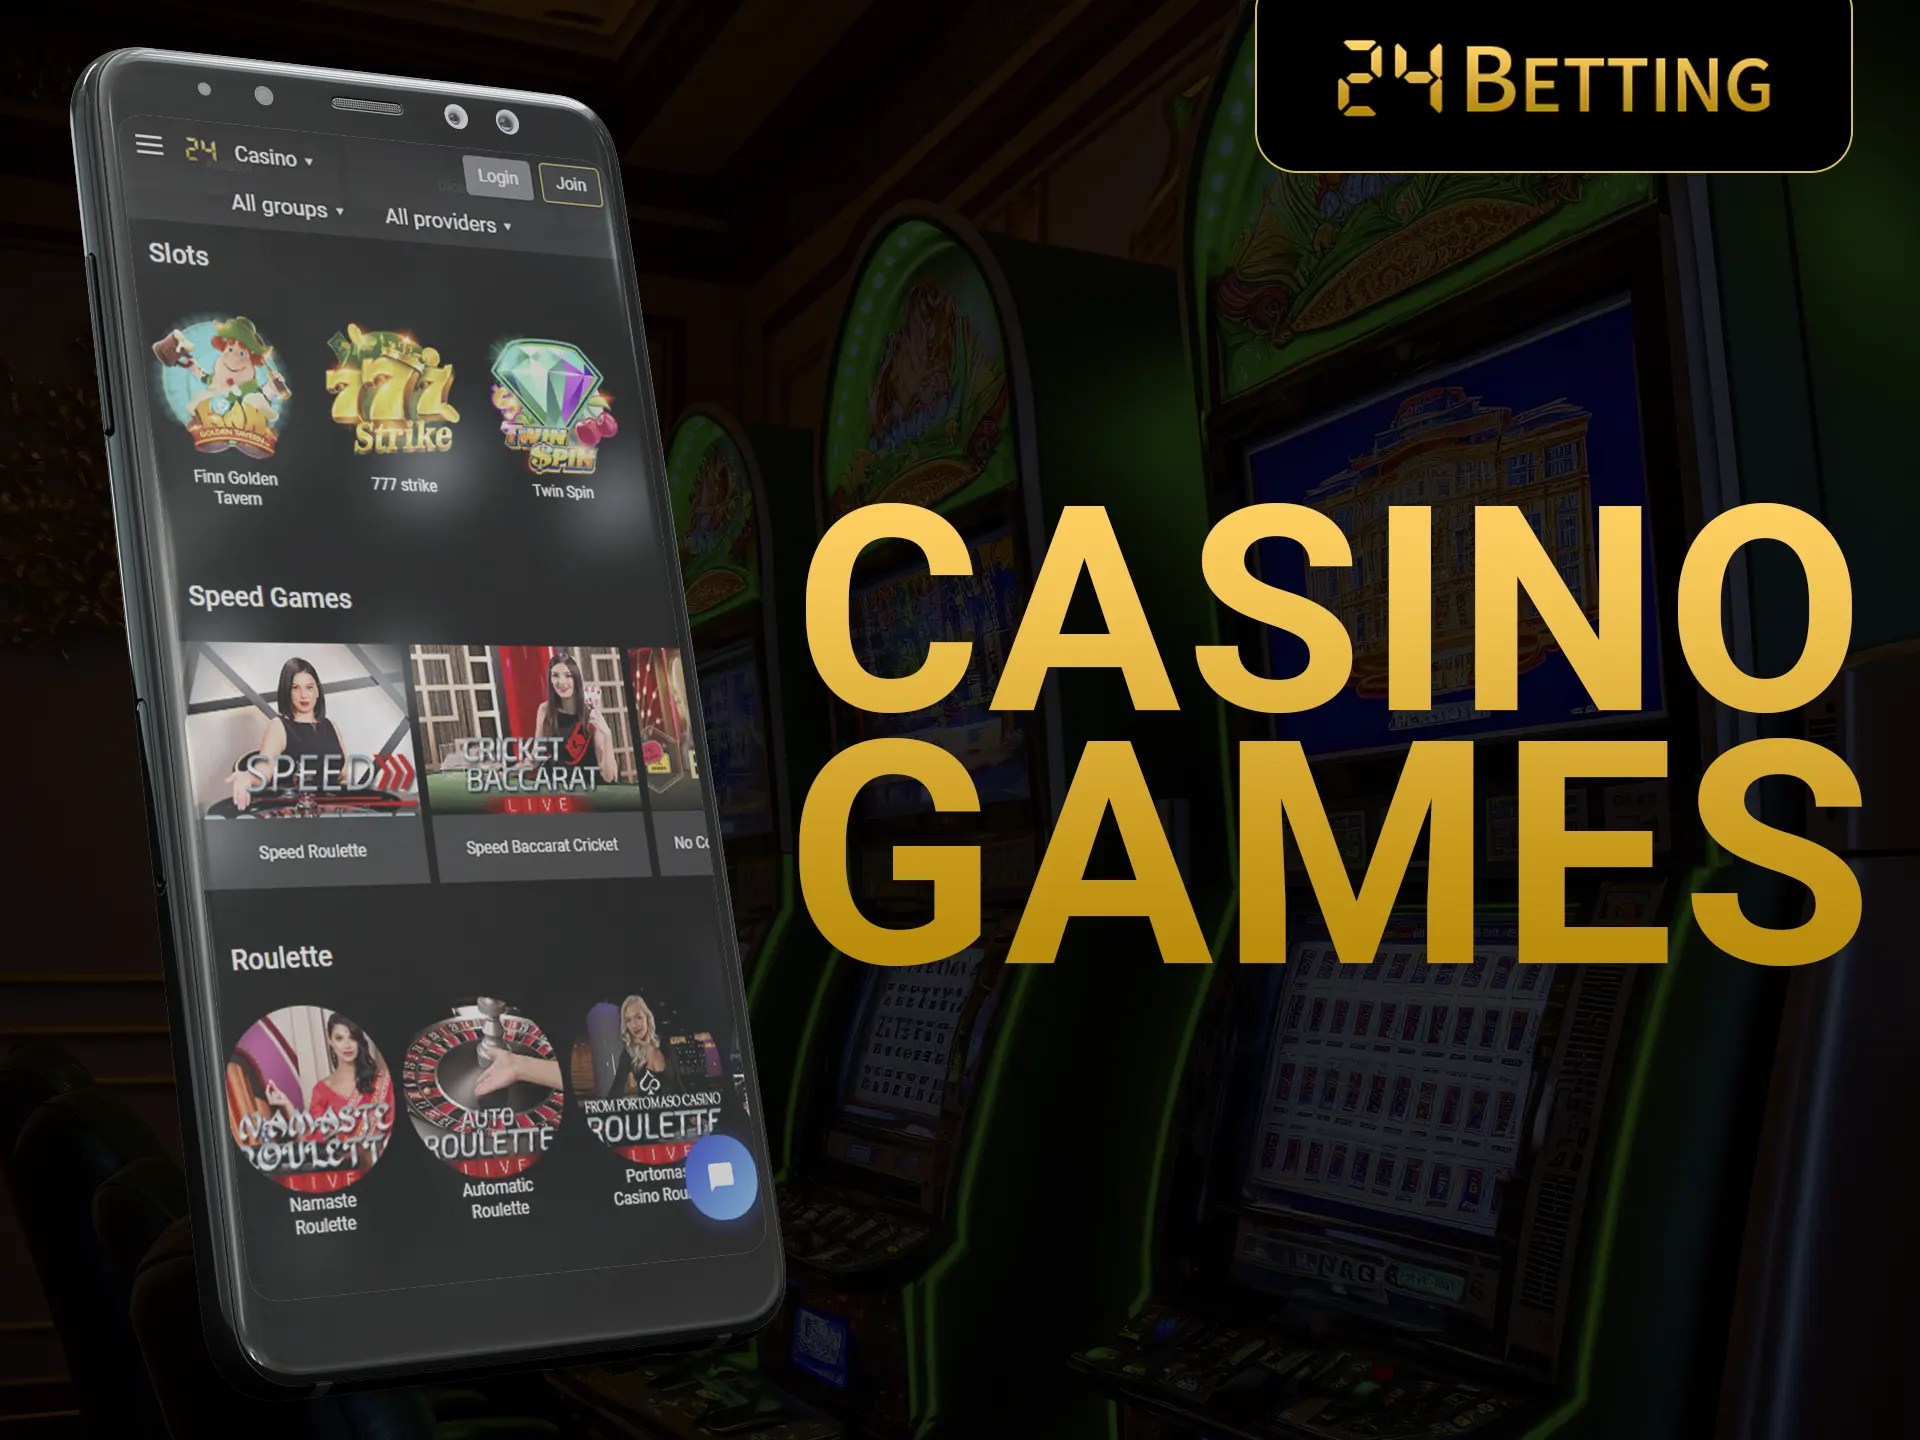 At 24Betting app play the best casino games.